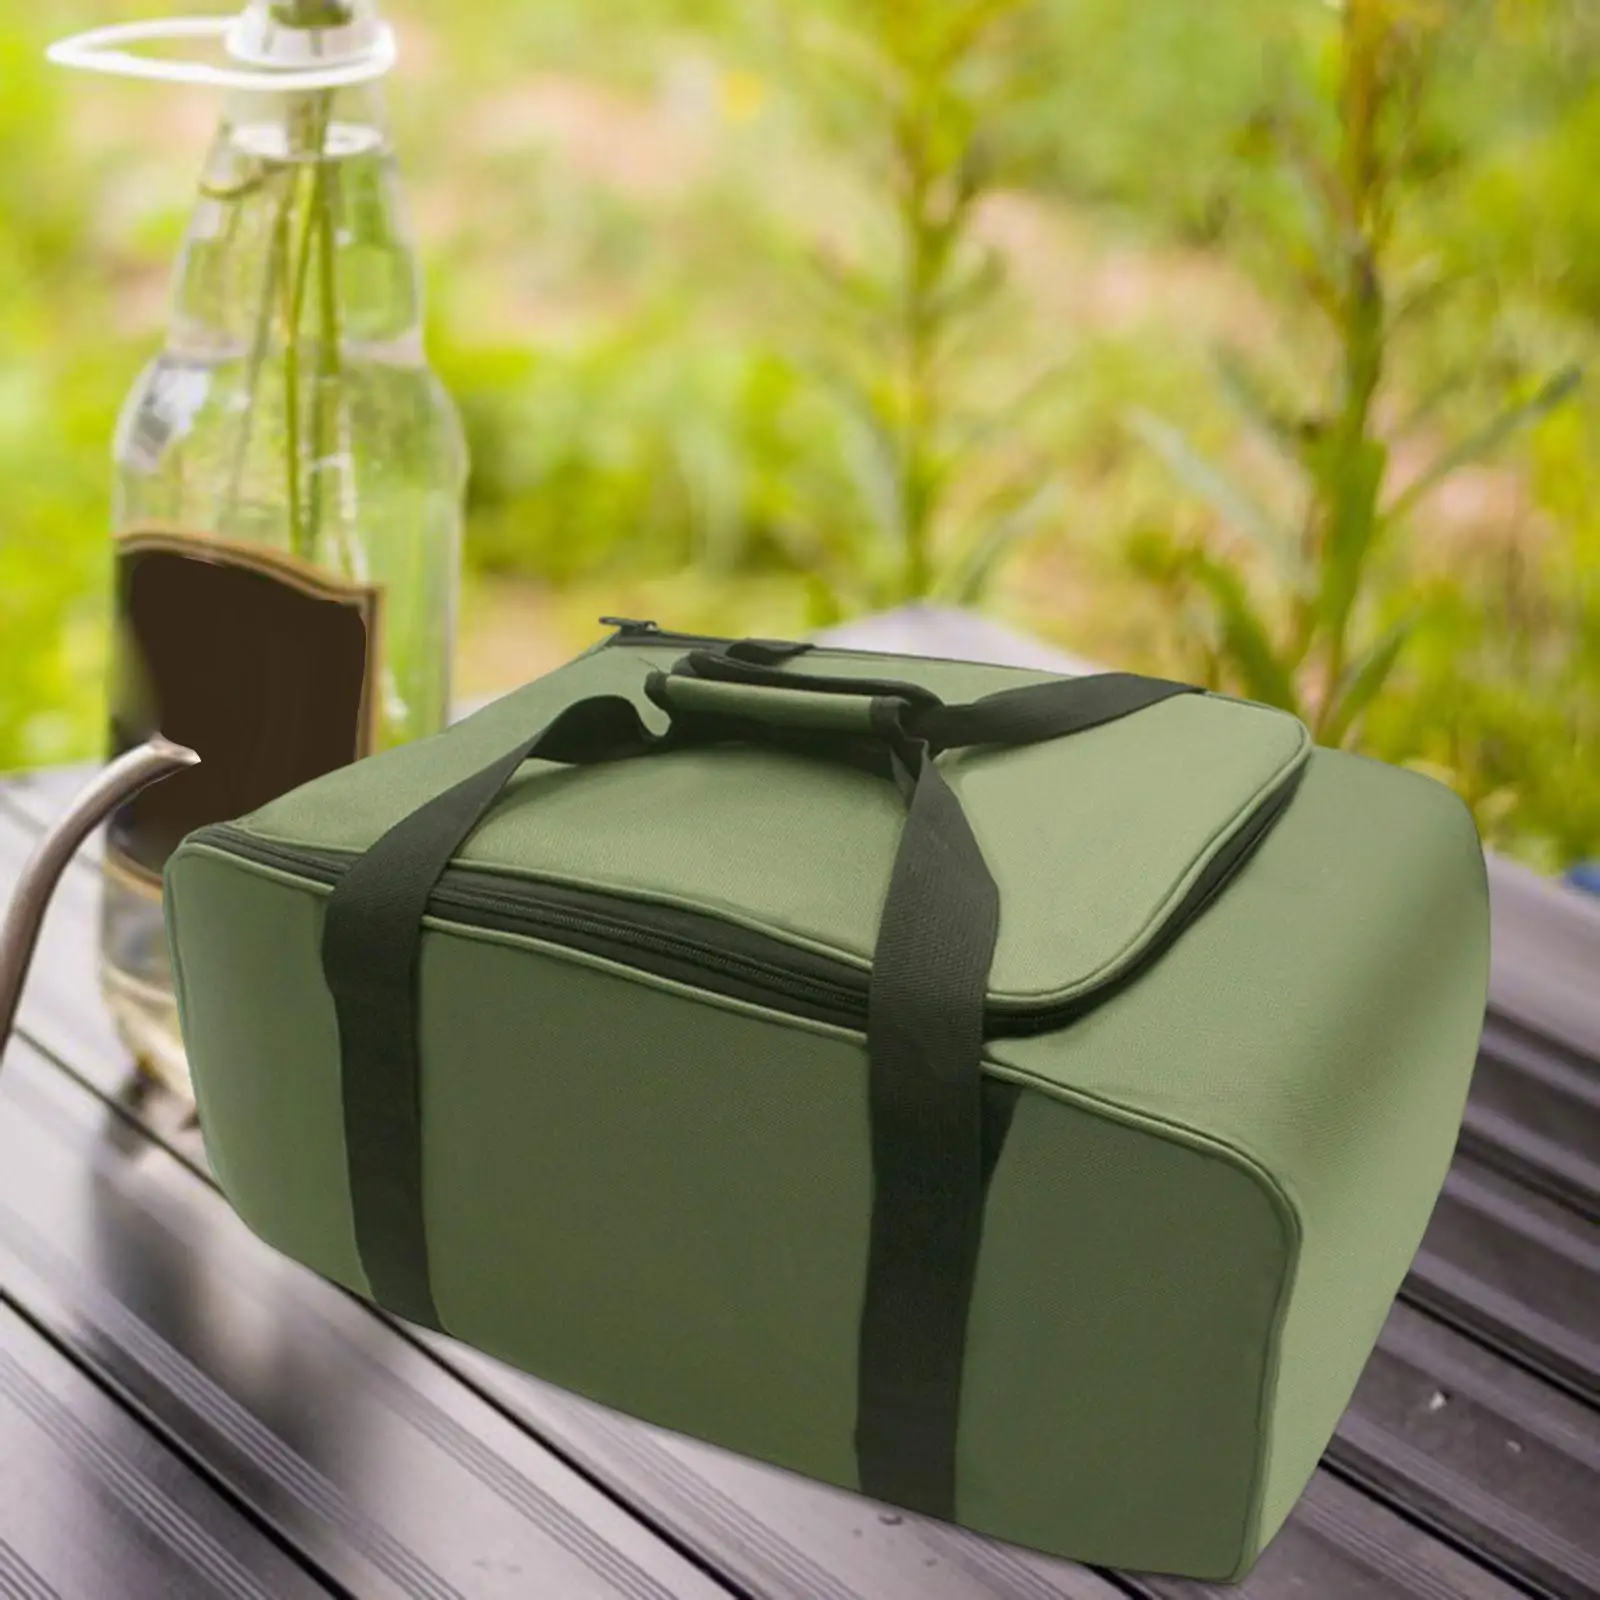 Gas Tank Storage Bag Fittings Organizer Basket for Camping Tableware Picnic Outdoor